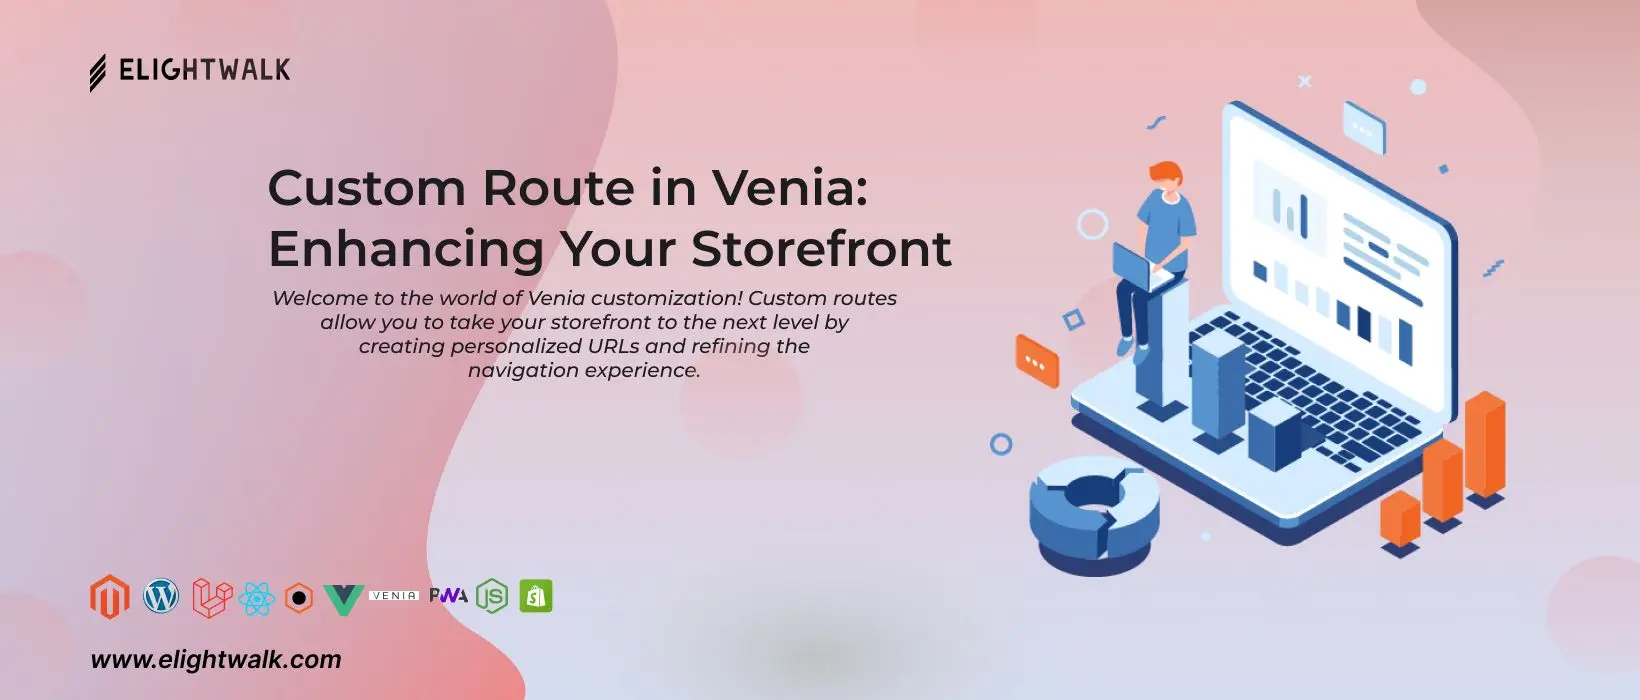 Custom Route in Venia: Enhancing Your Storefront